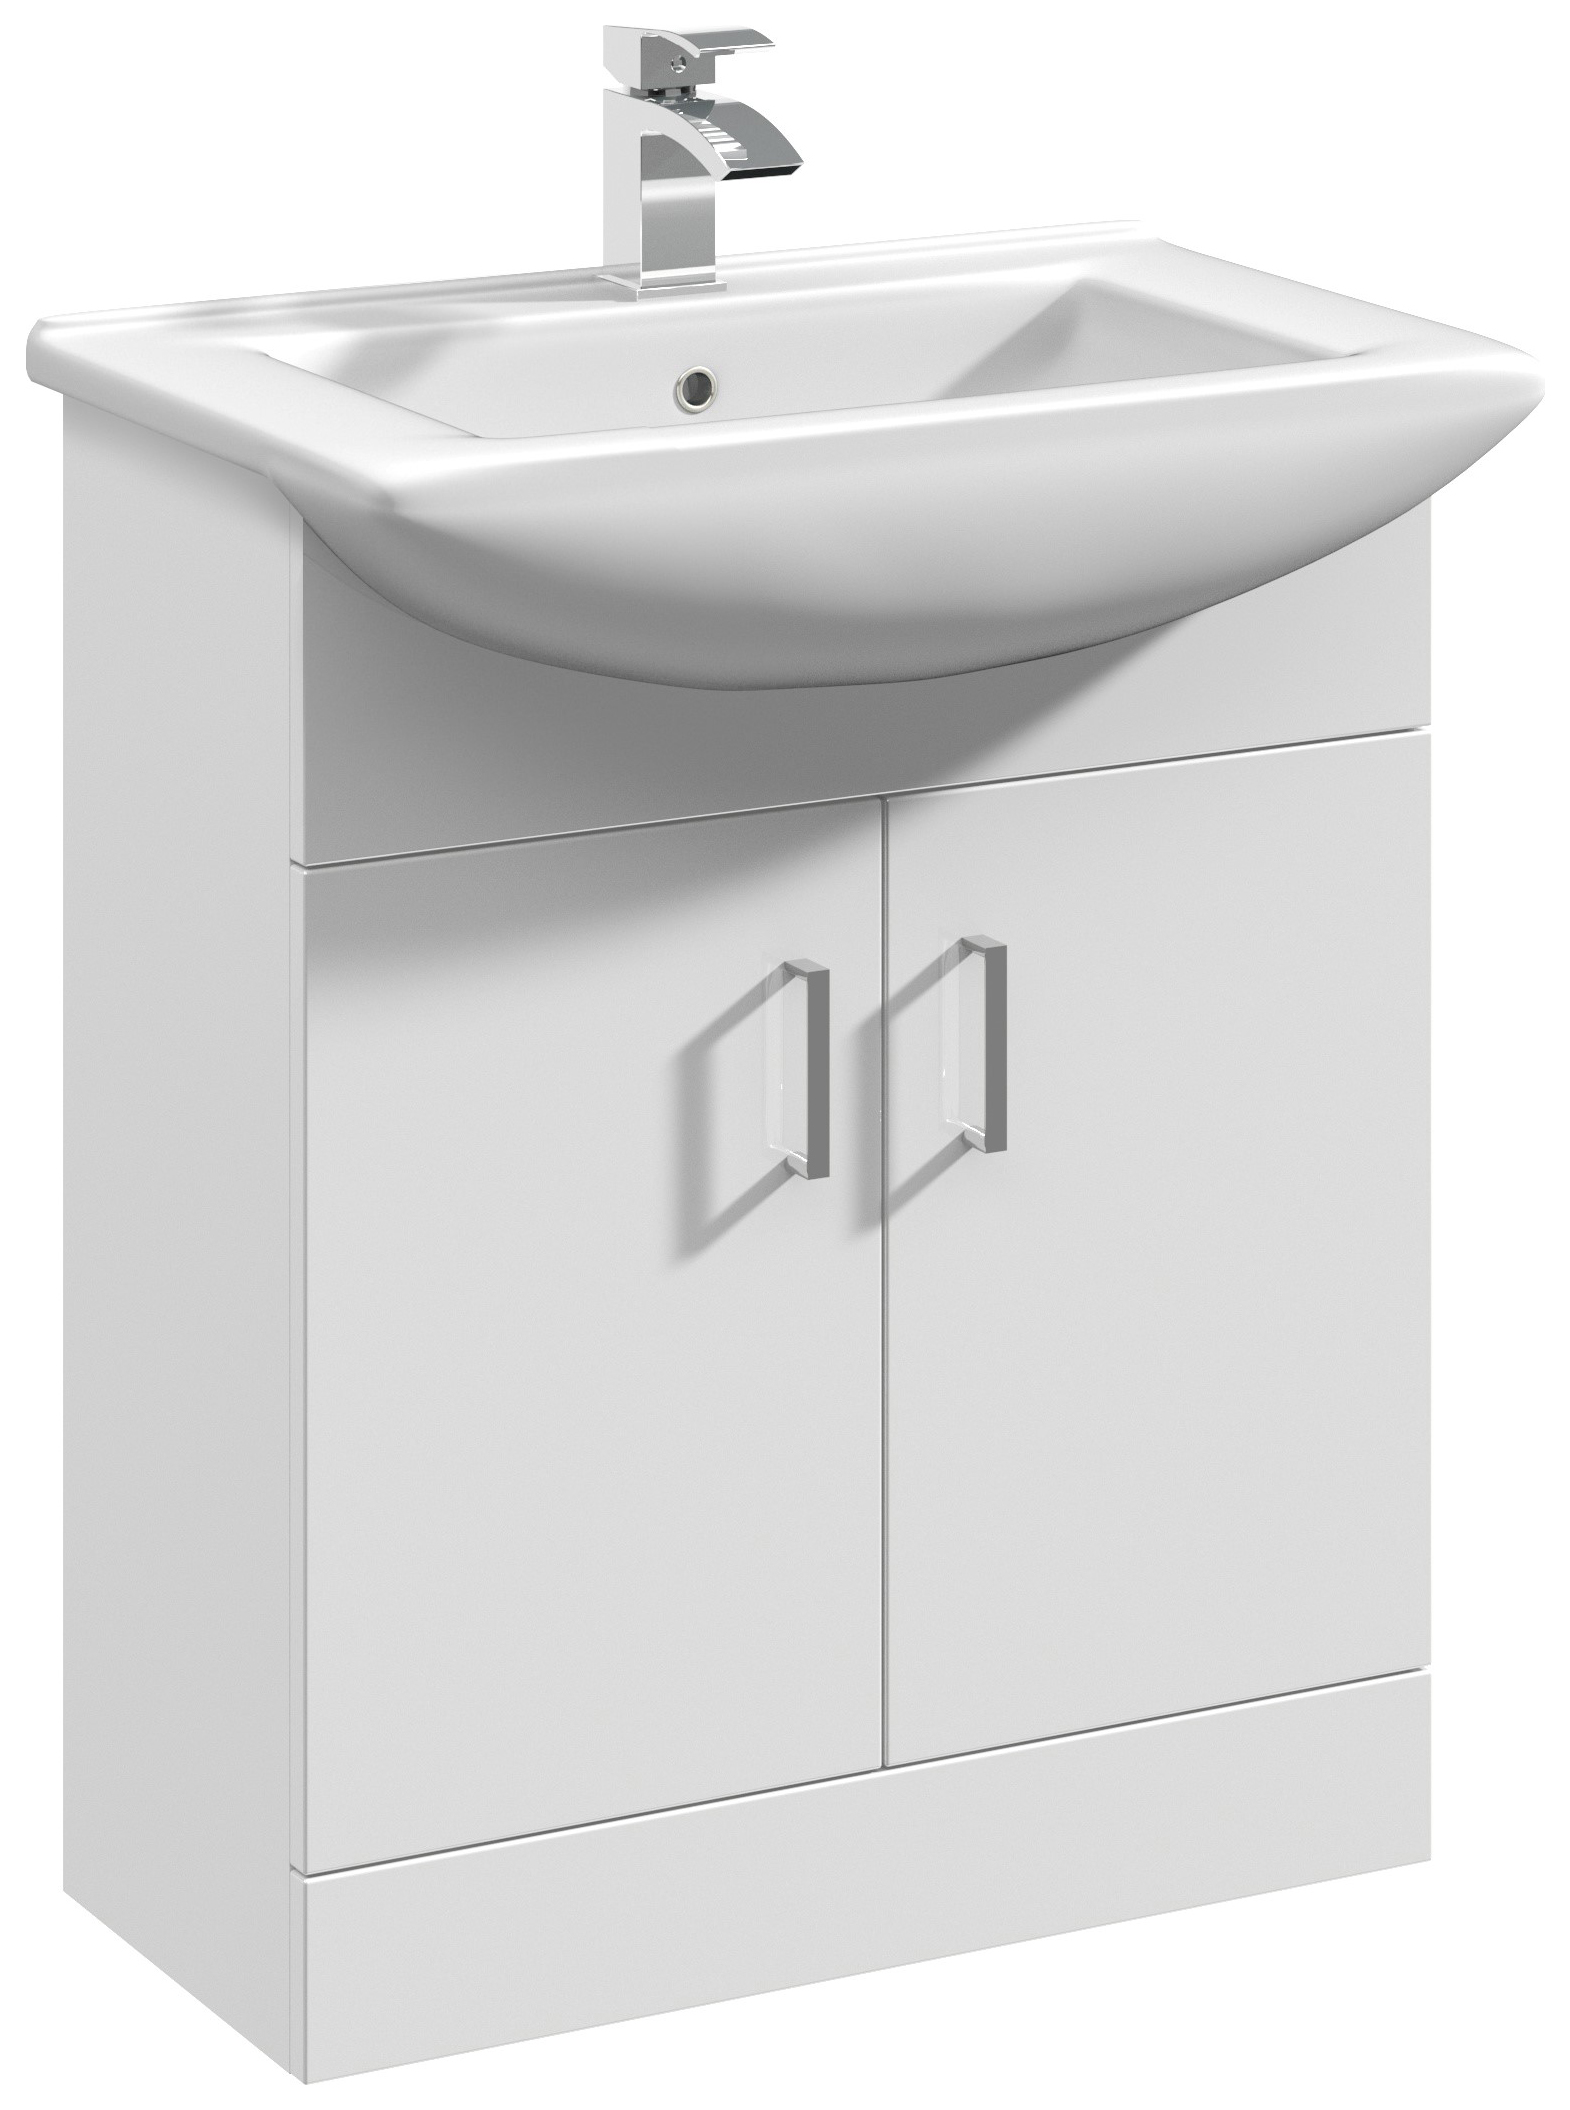 Nuie Mayford White Gloss Vanity Unit & Square Basin - 827 x 665mm